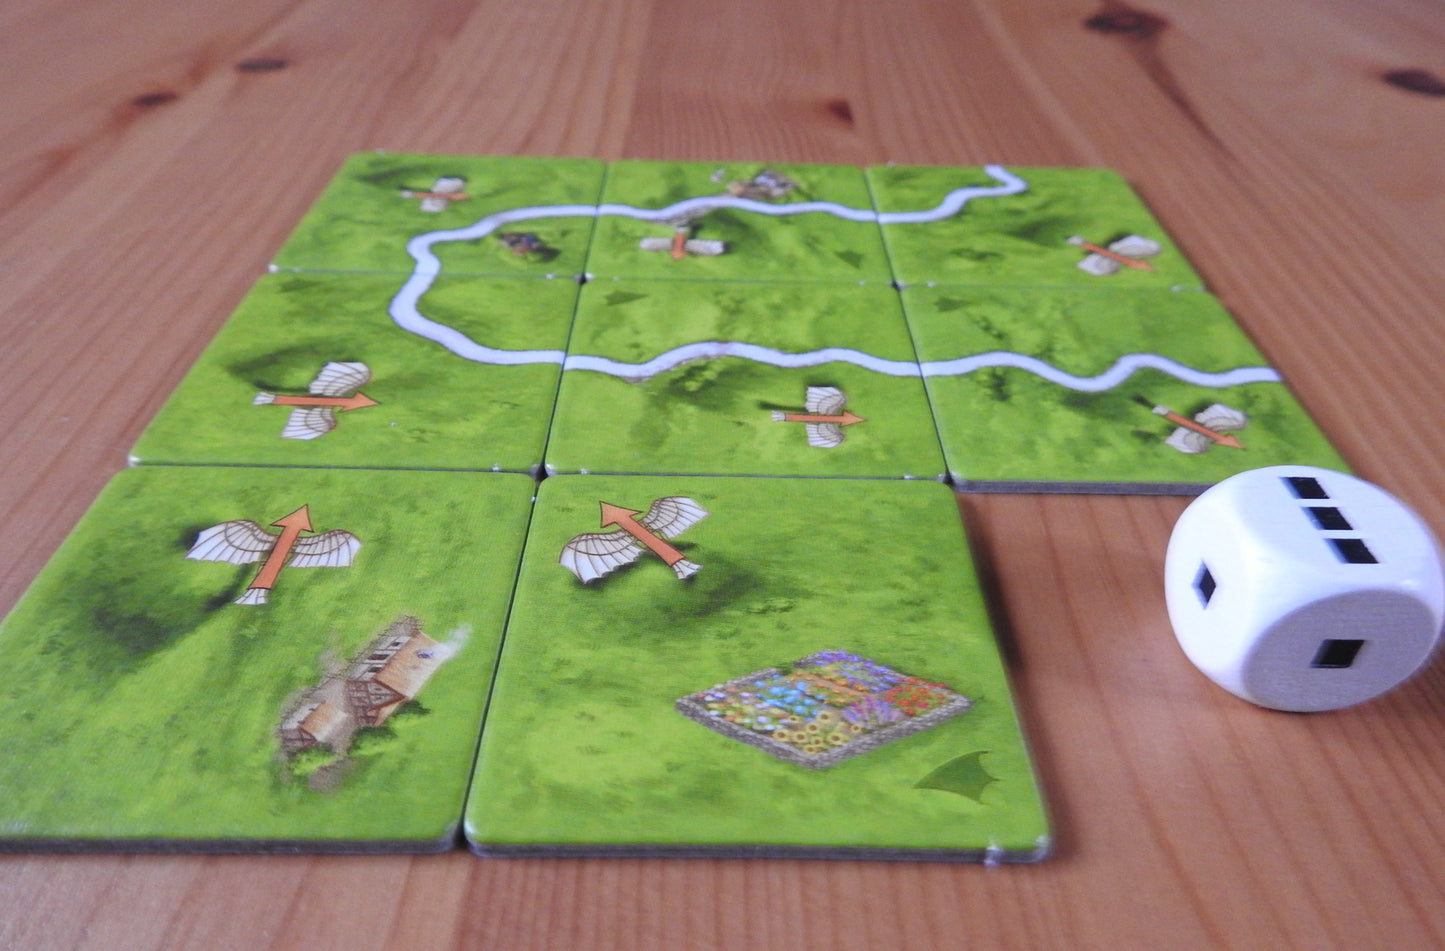 A final view of all the components of this Carcassone Flying Machines mini expansion.